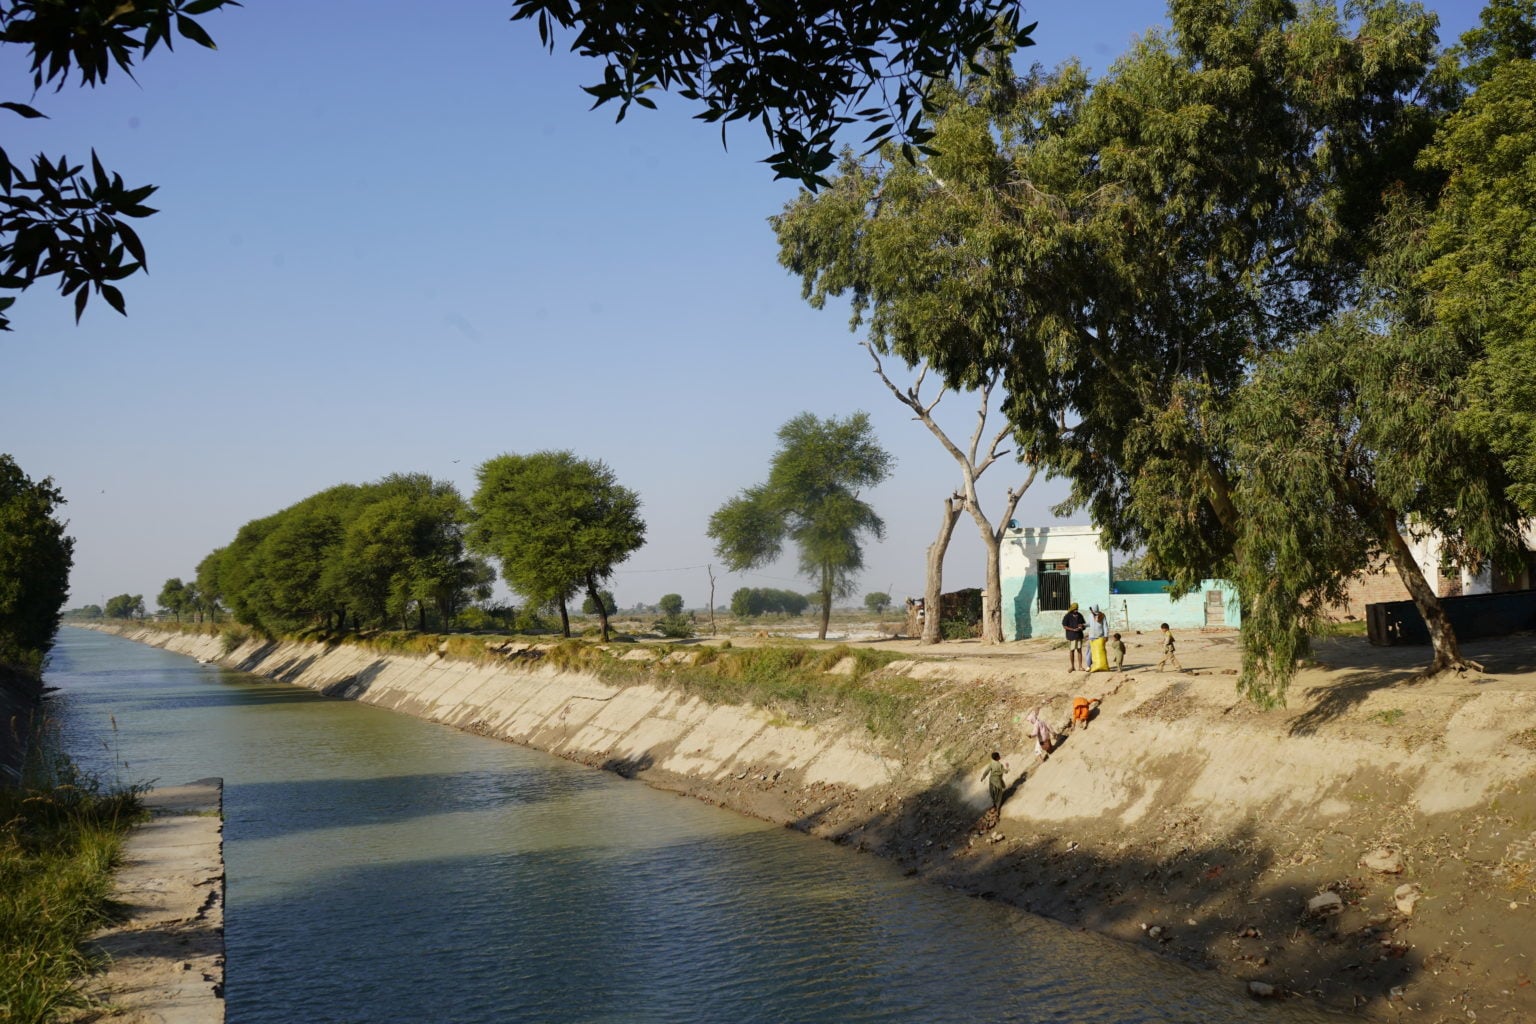 A view of Akram wah canal which supplies irrigation water to Hyderabad, Tando Muhammad Khan and Badin tail areas. — Photo by Manoj Genani